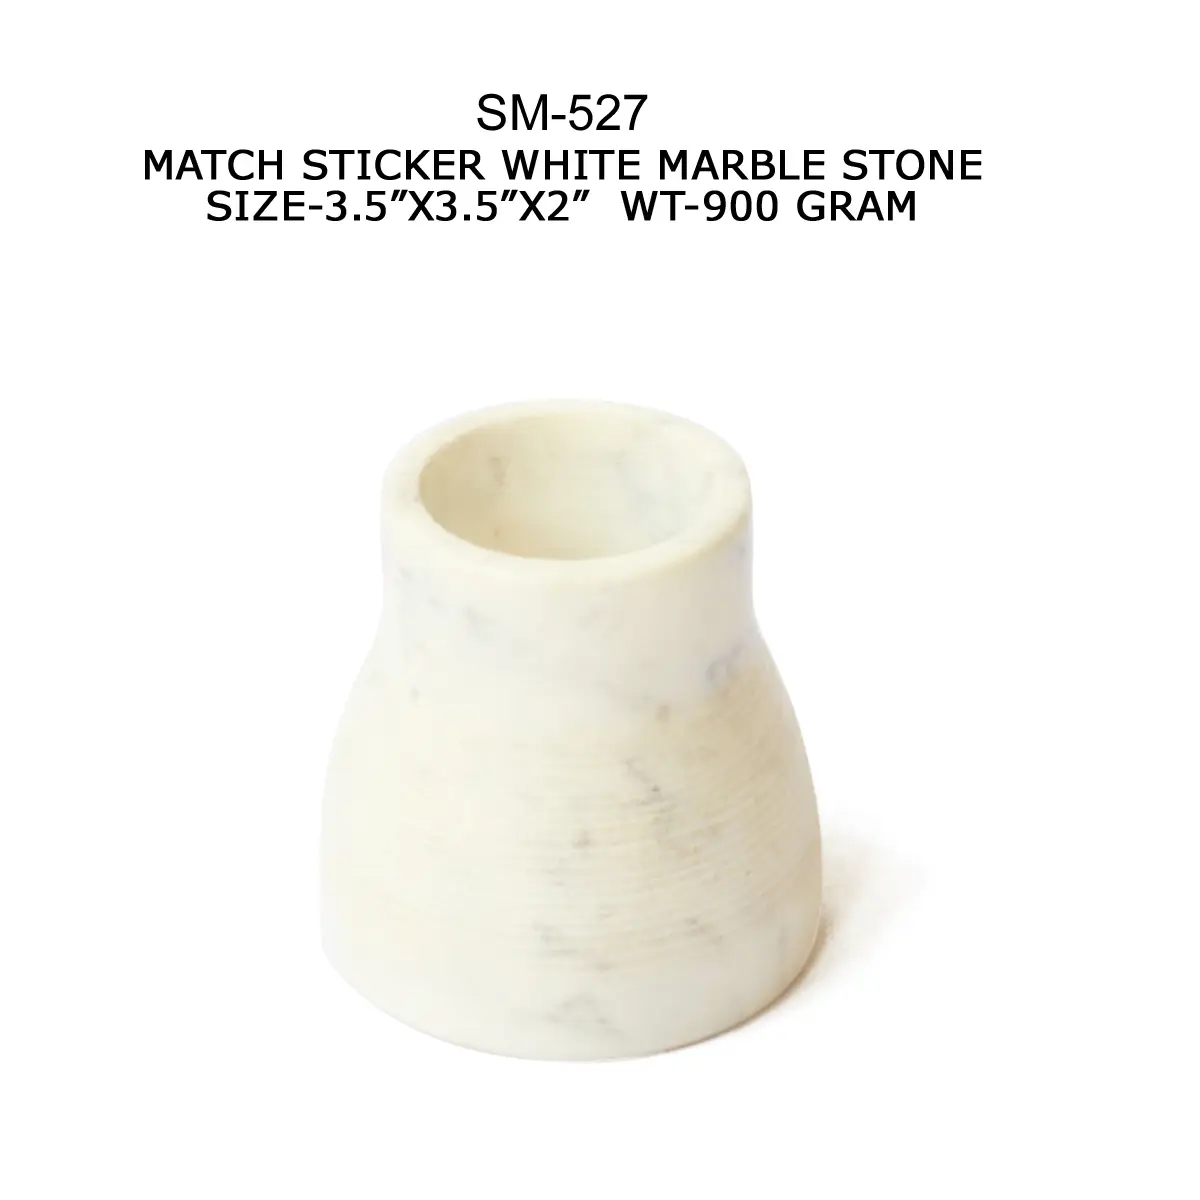 MATCH STRIKER WHITE MARBLE STONE
(OUR SAMPLE NO. 2)